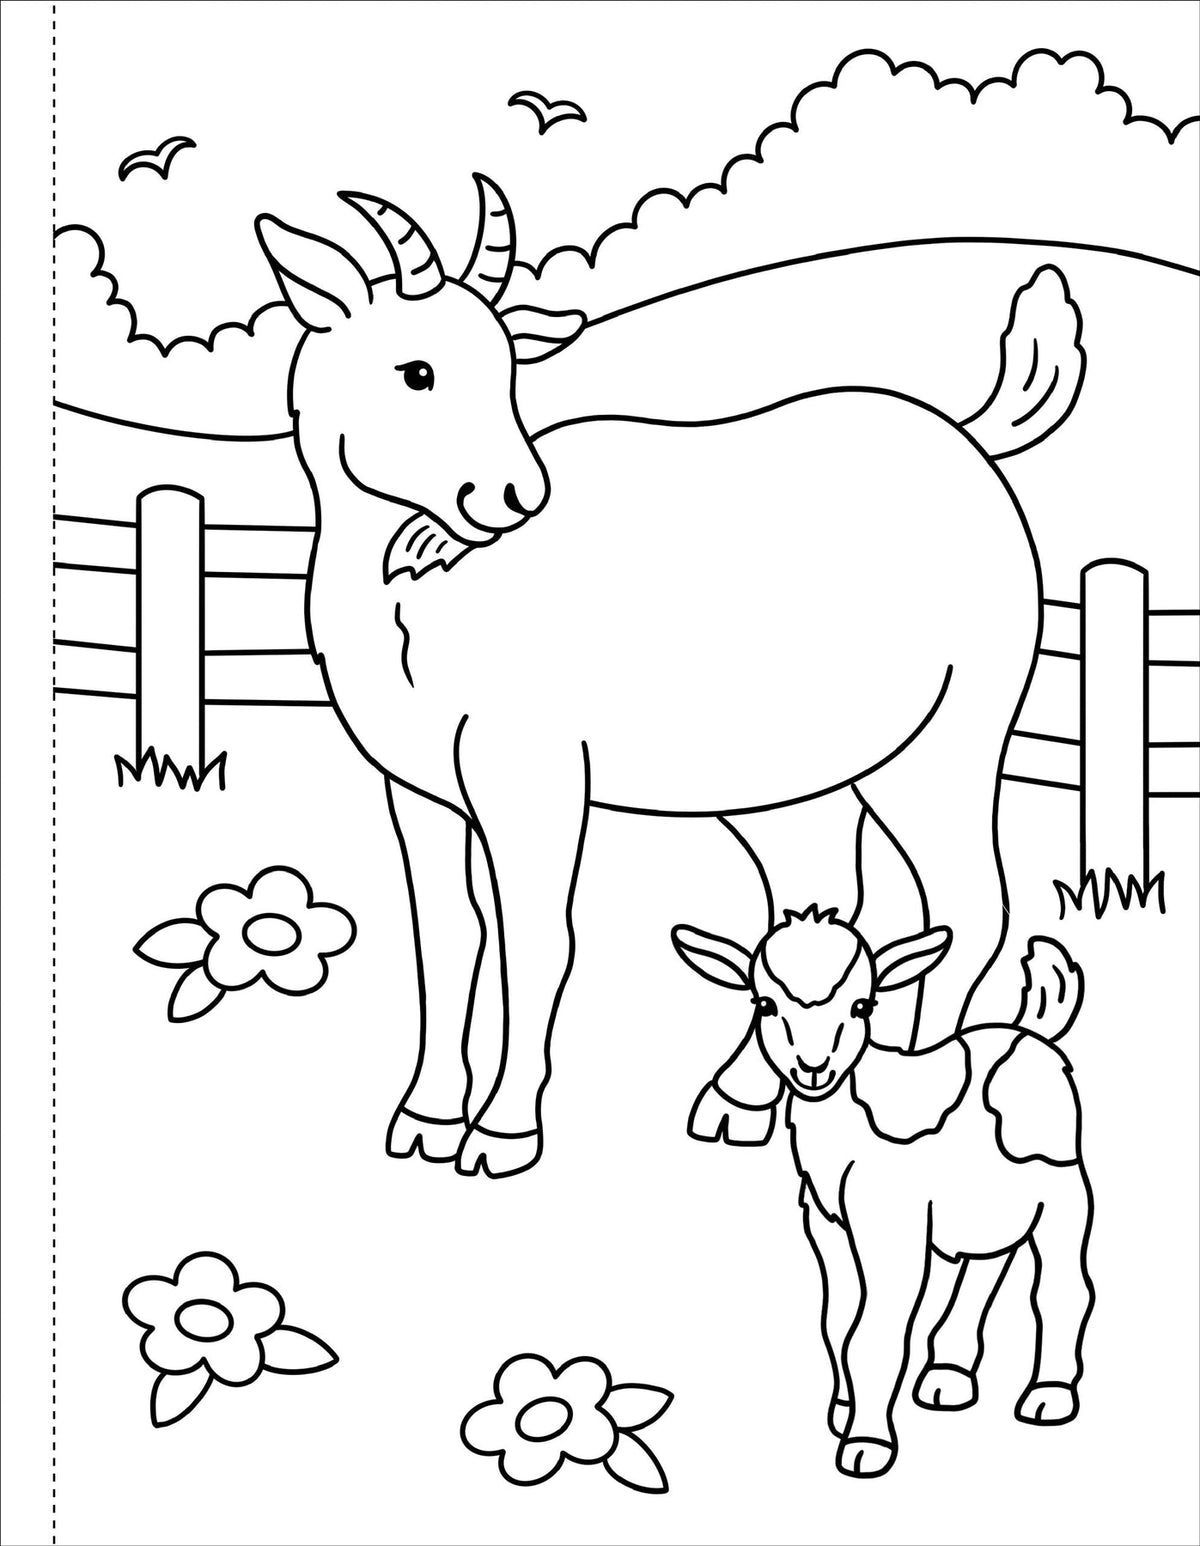 Peter Pauper My First Coloring Book On the Farm